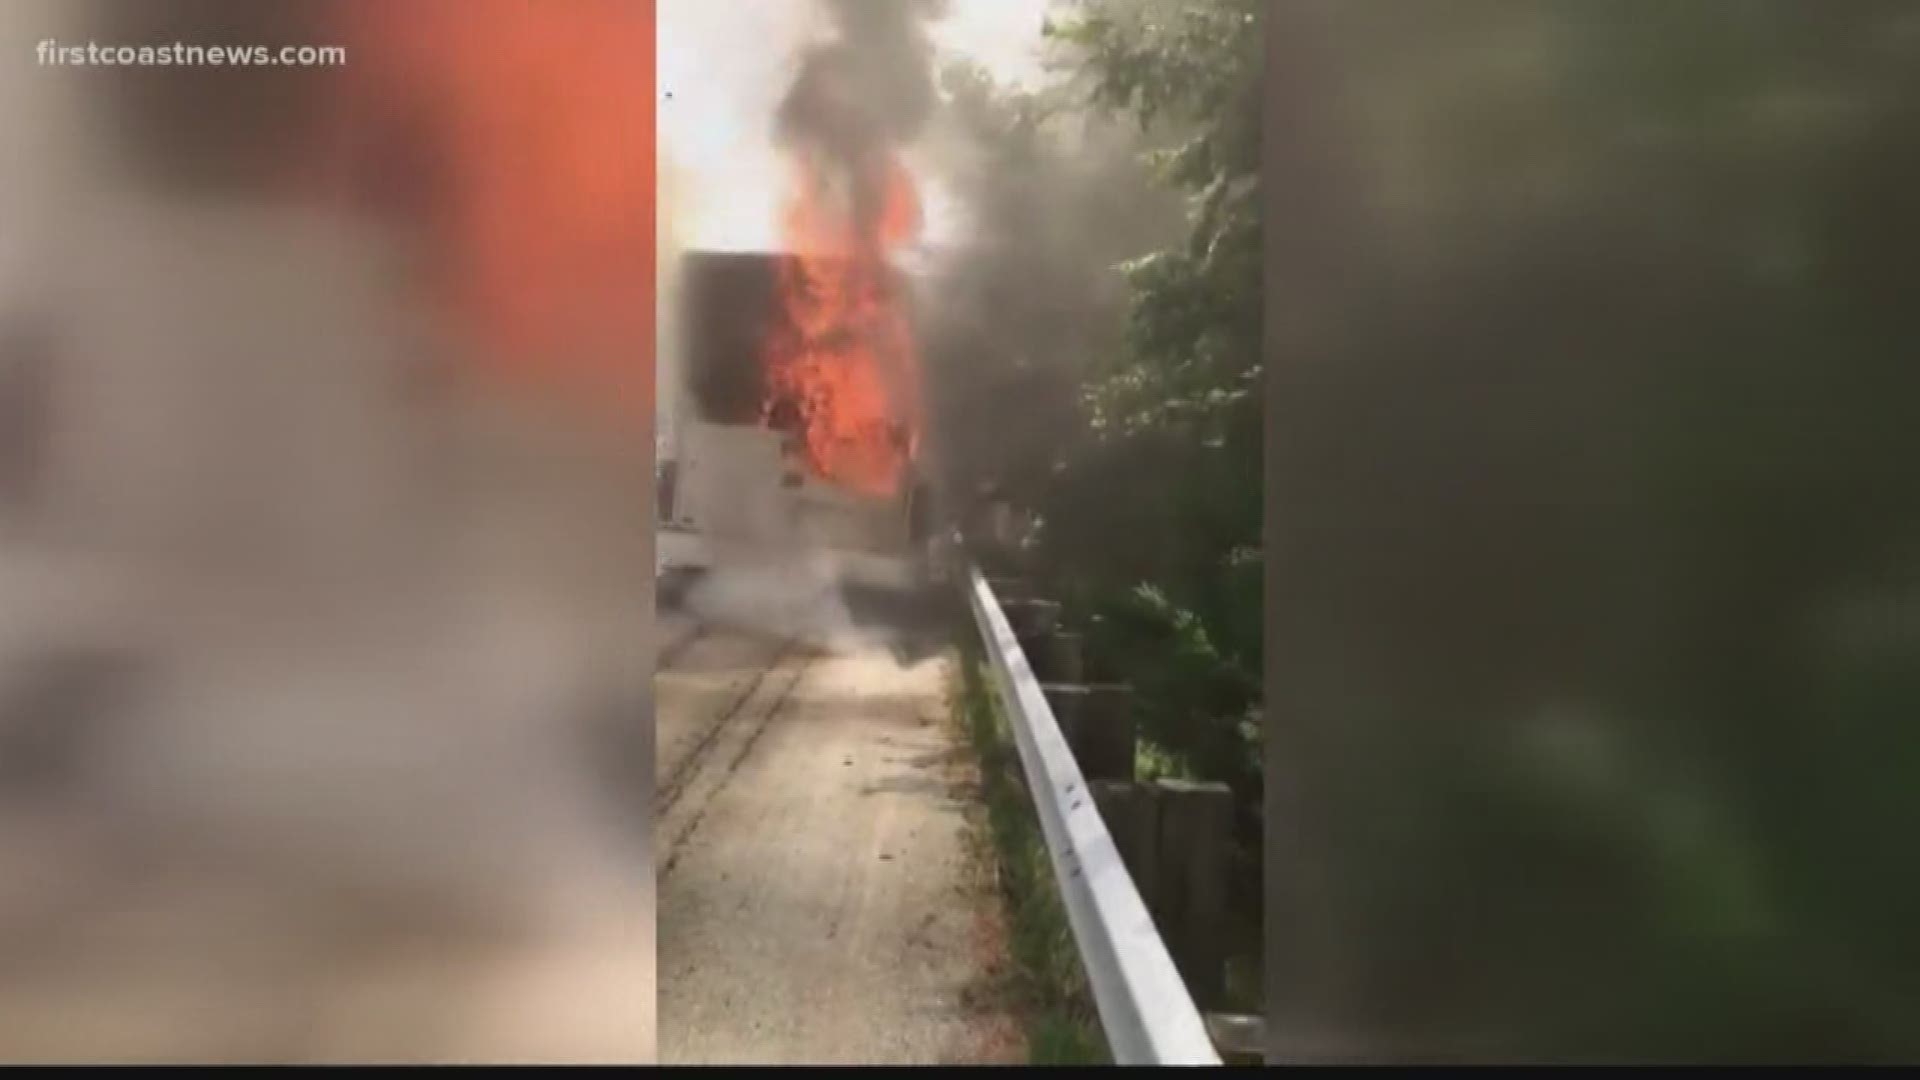 Members of Jacksonville's Chets Creek Church had a scare over the weekend when one of their buses caught fire in South Carolina.